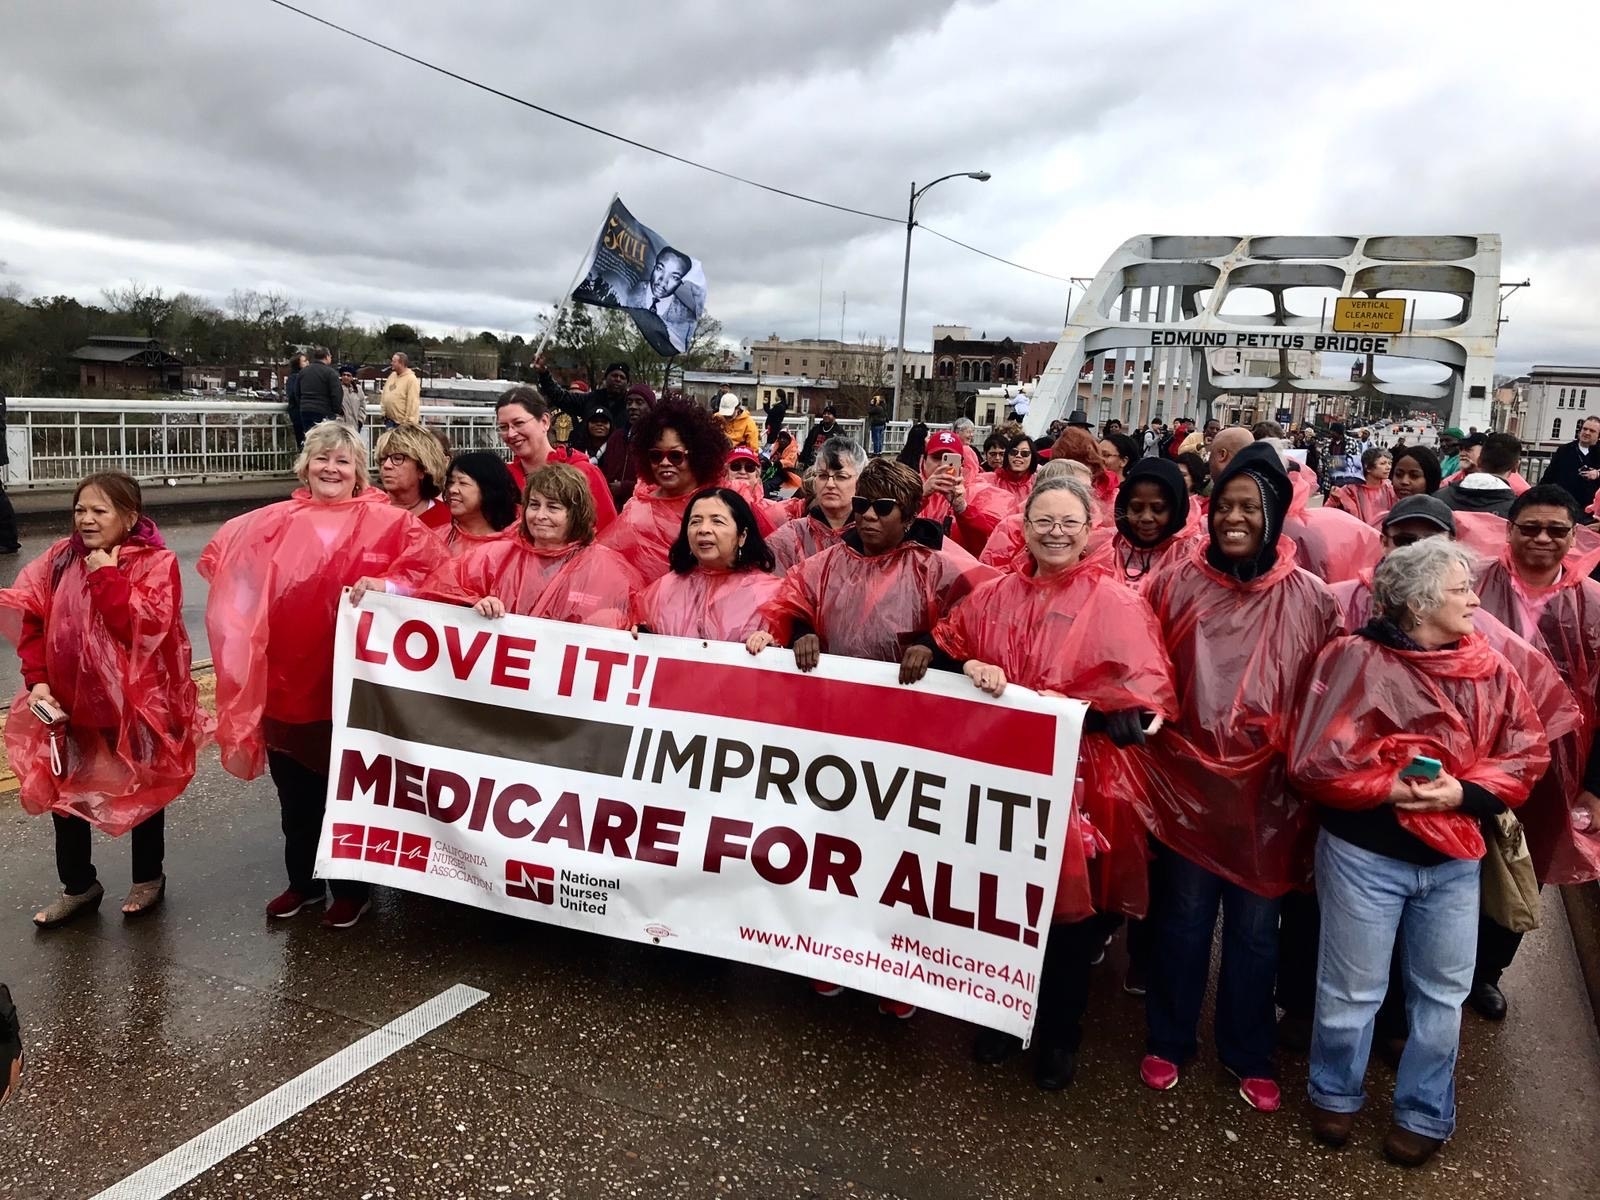 NationalNursesUnited on X: For too many of us, running from